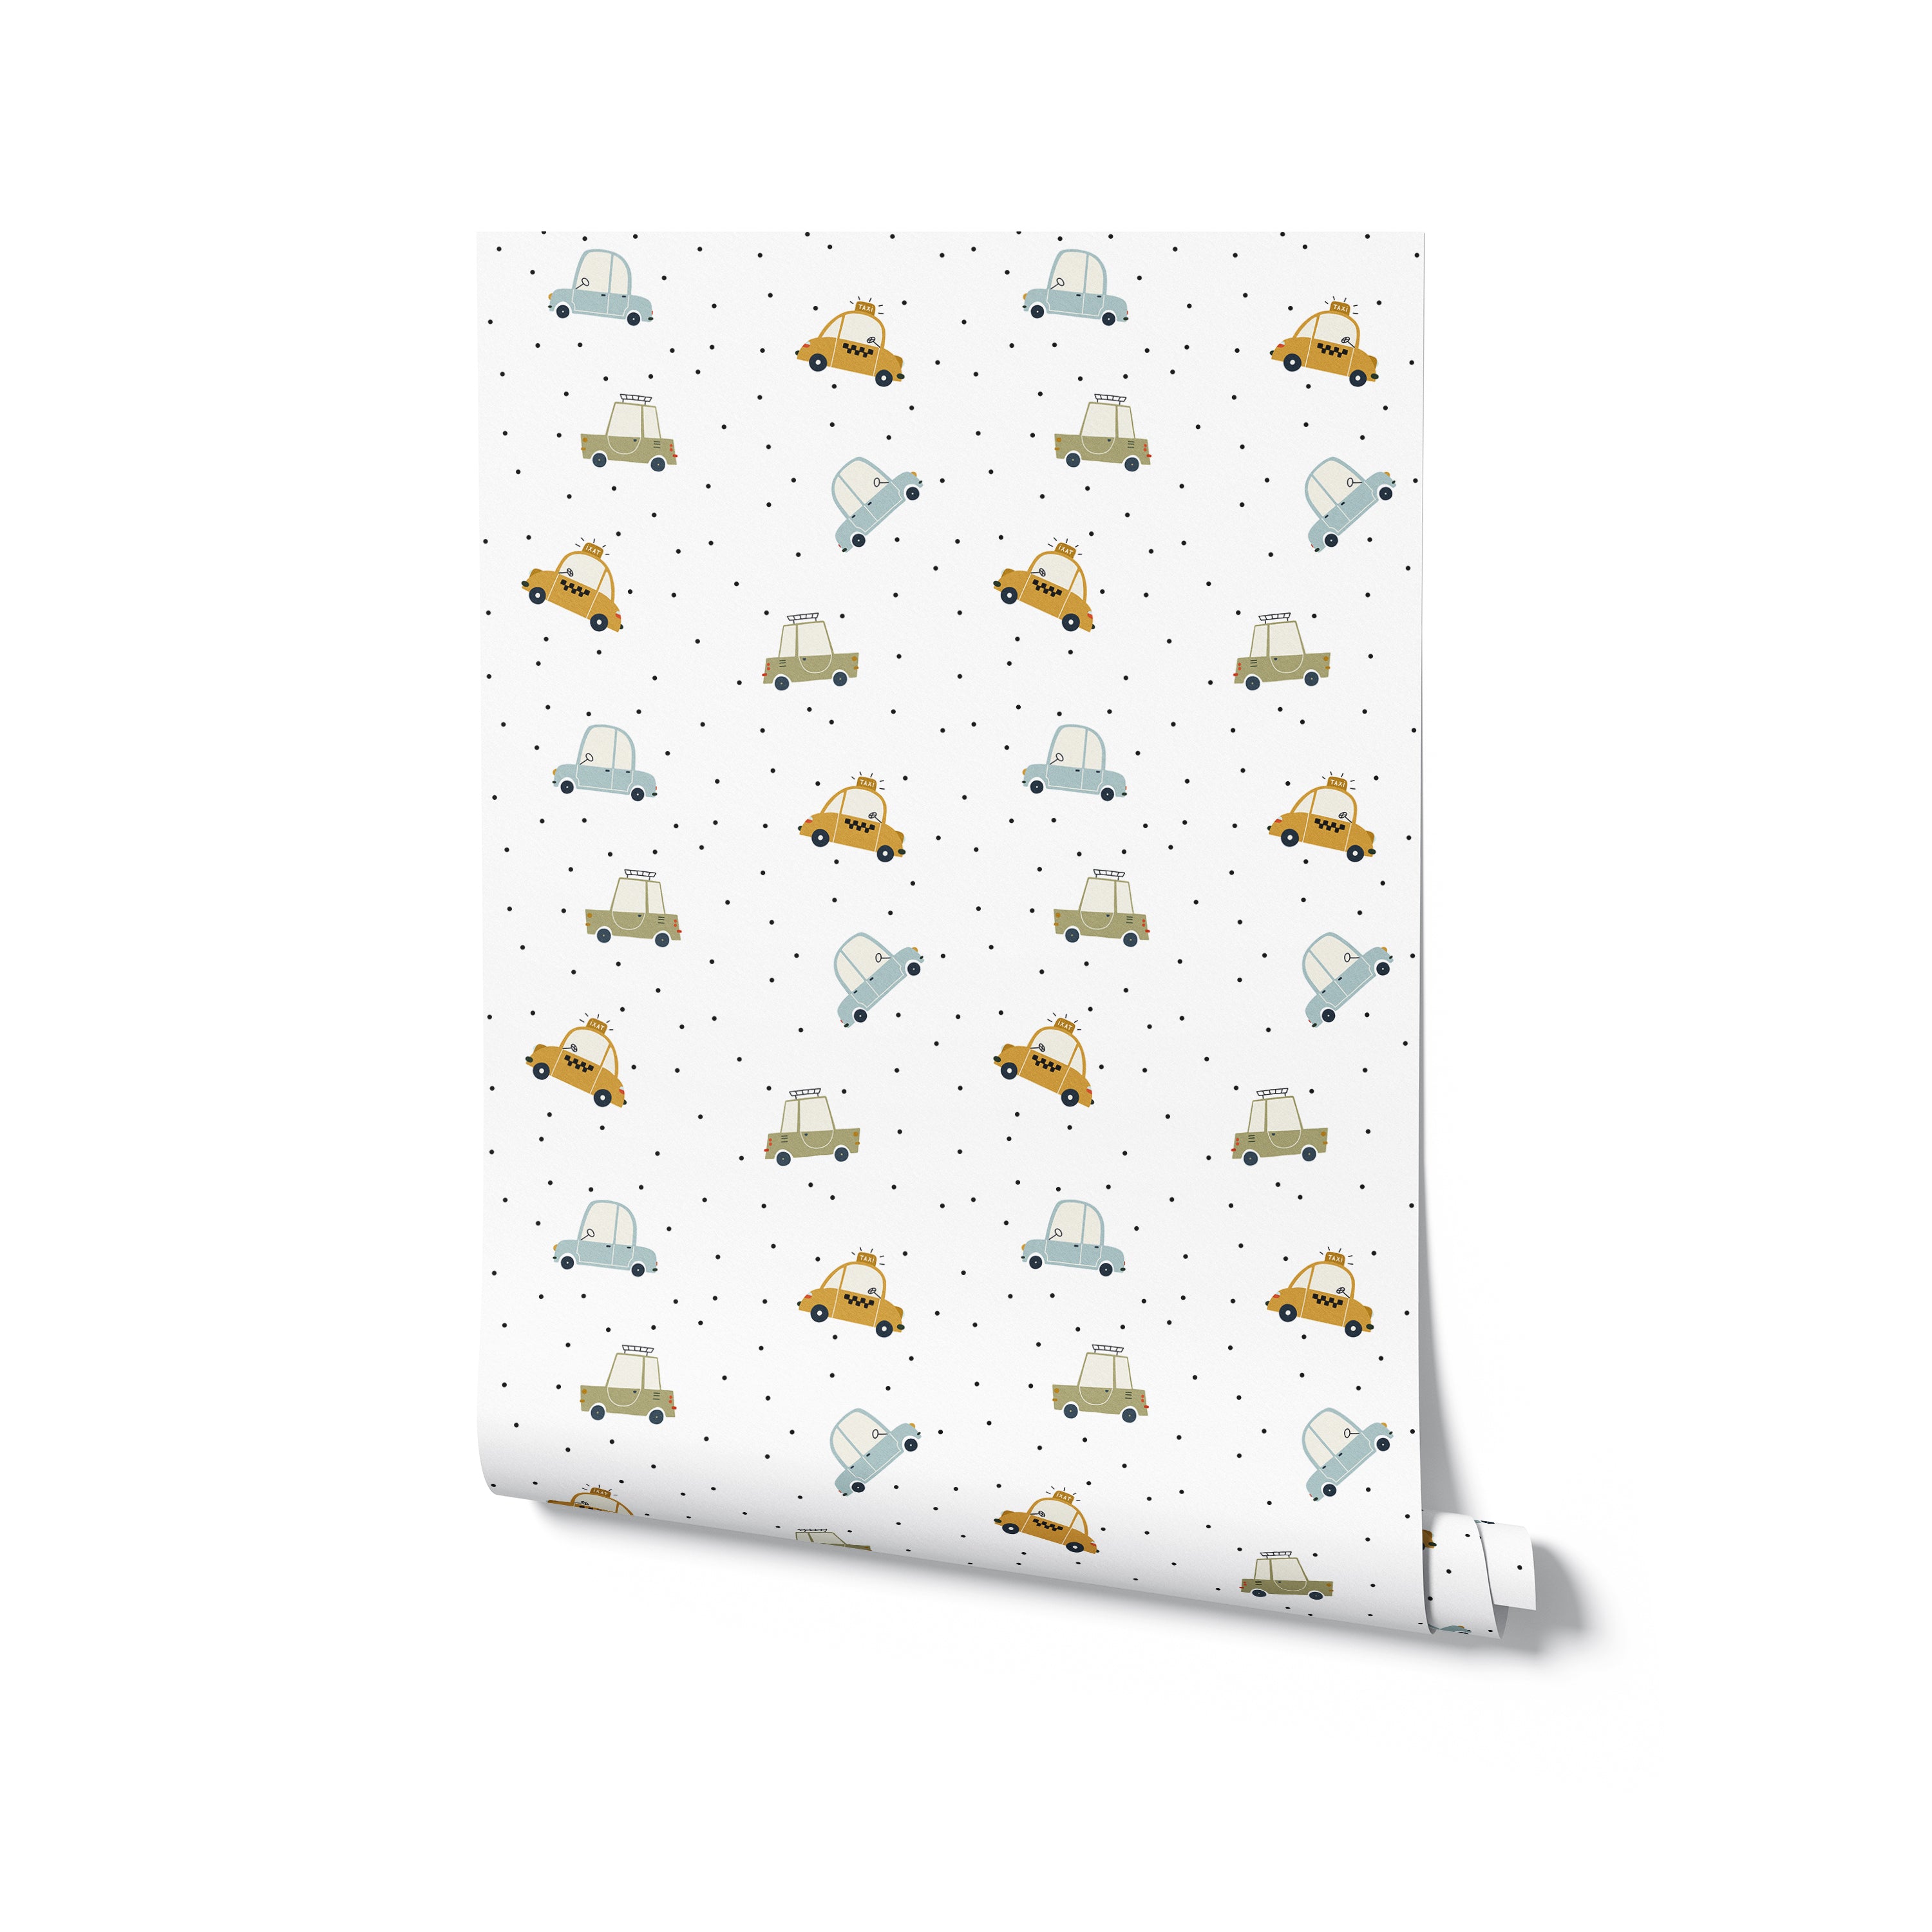 A roll of Cute Cars Wallpaper 01 displaying a whimsical pattern of small, colorful cartoon cars and black dots on a white background, perfect for adding a fun and creative touch to any child's room